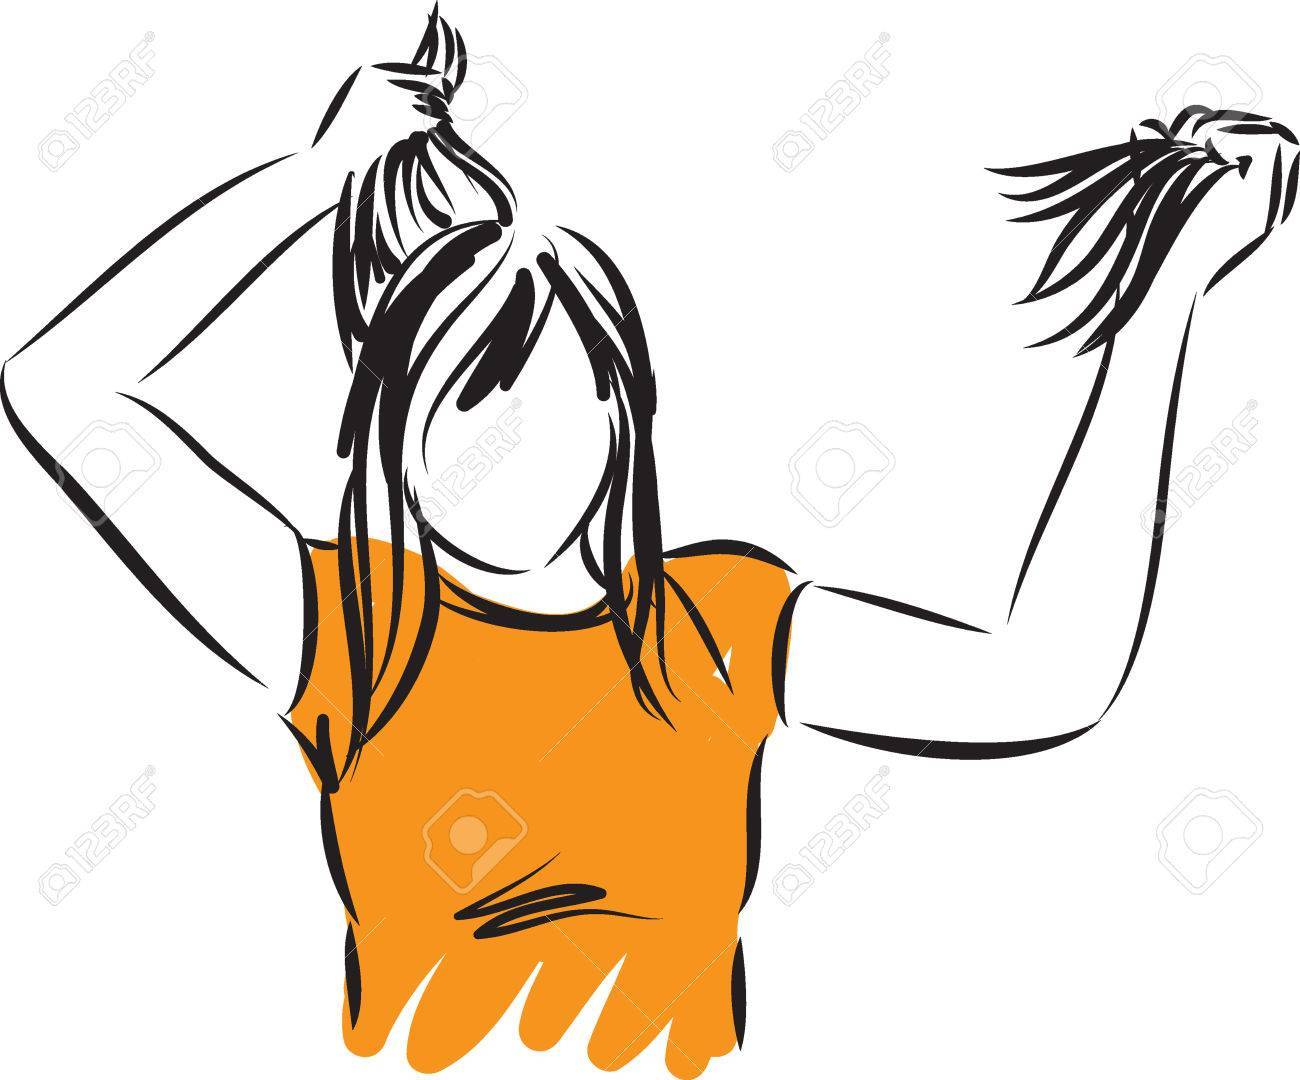 Woman Pulling Hair Out Clipart Free Images At Clker C - vrogue.co